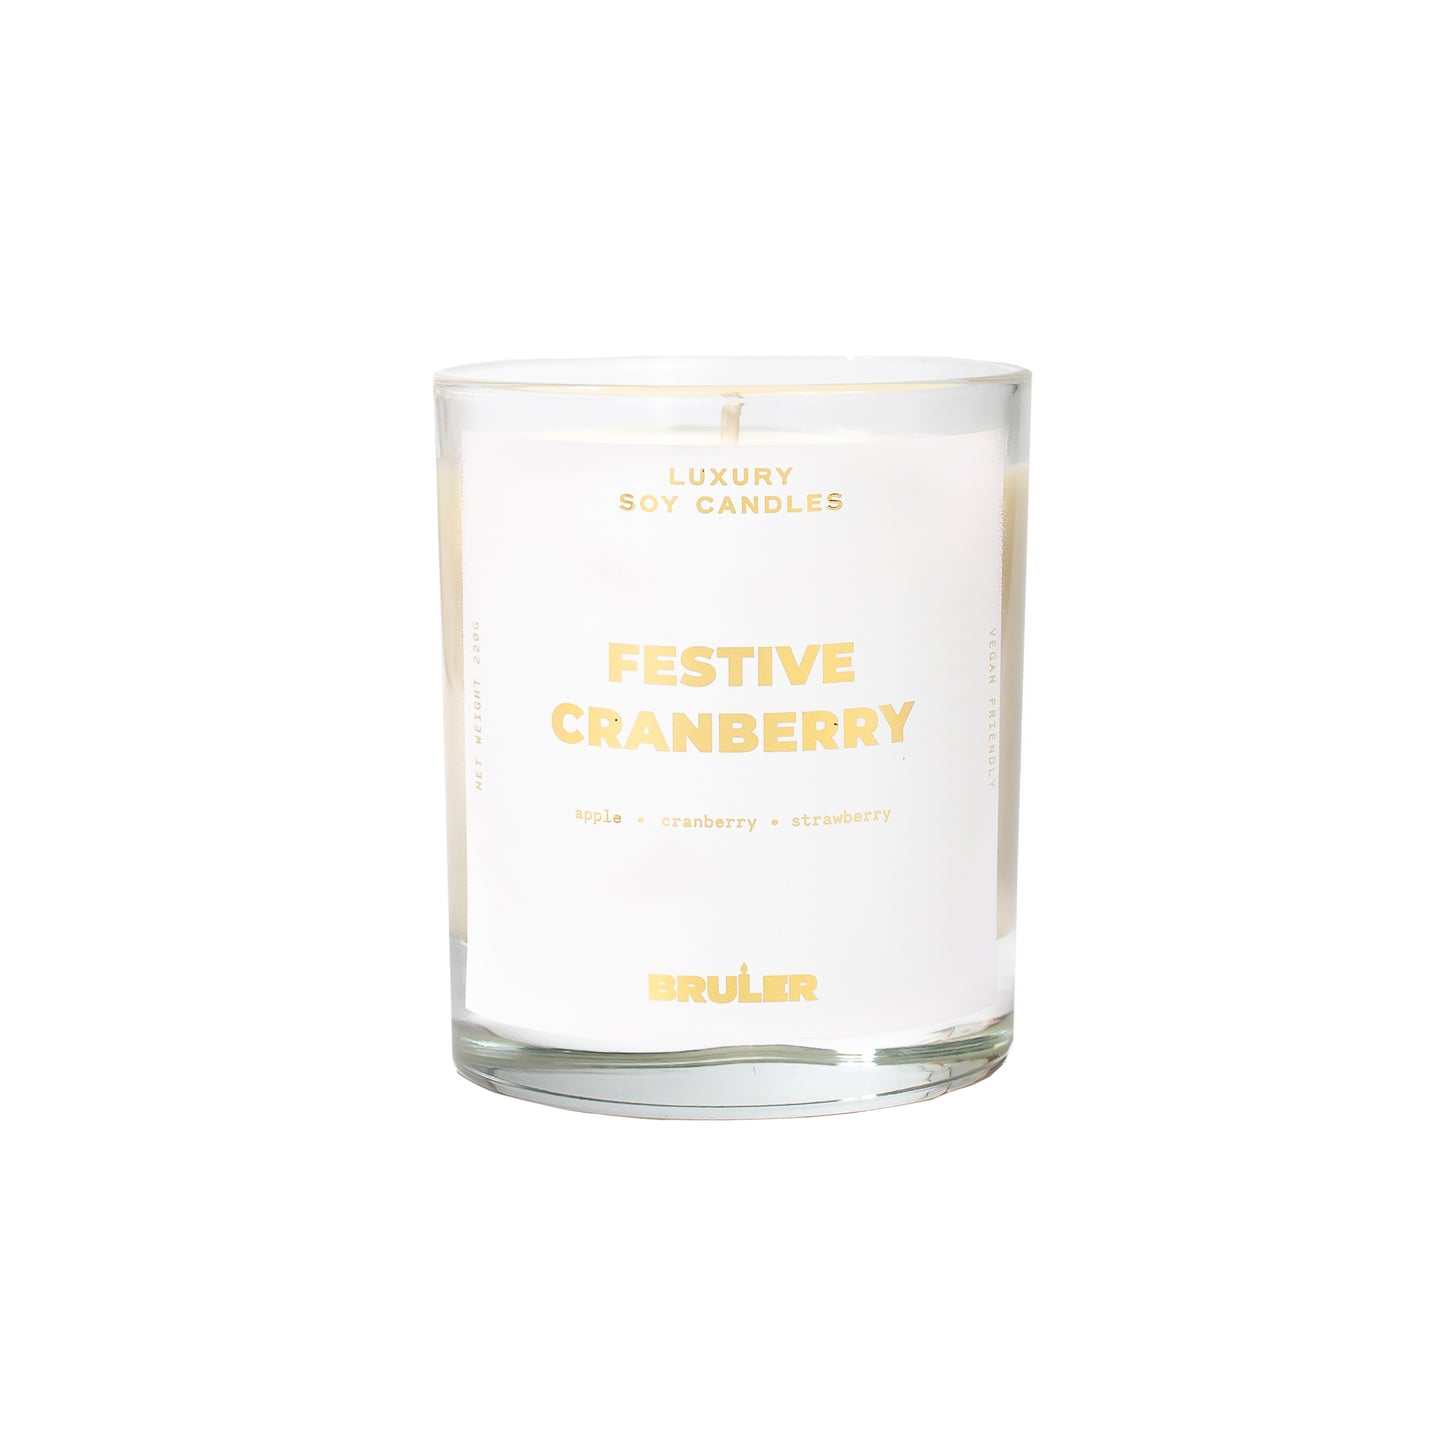 Festive Cranberry Candle - Clear Glass